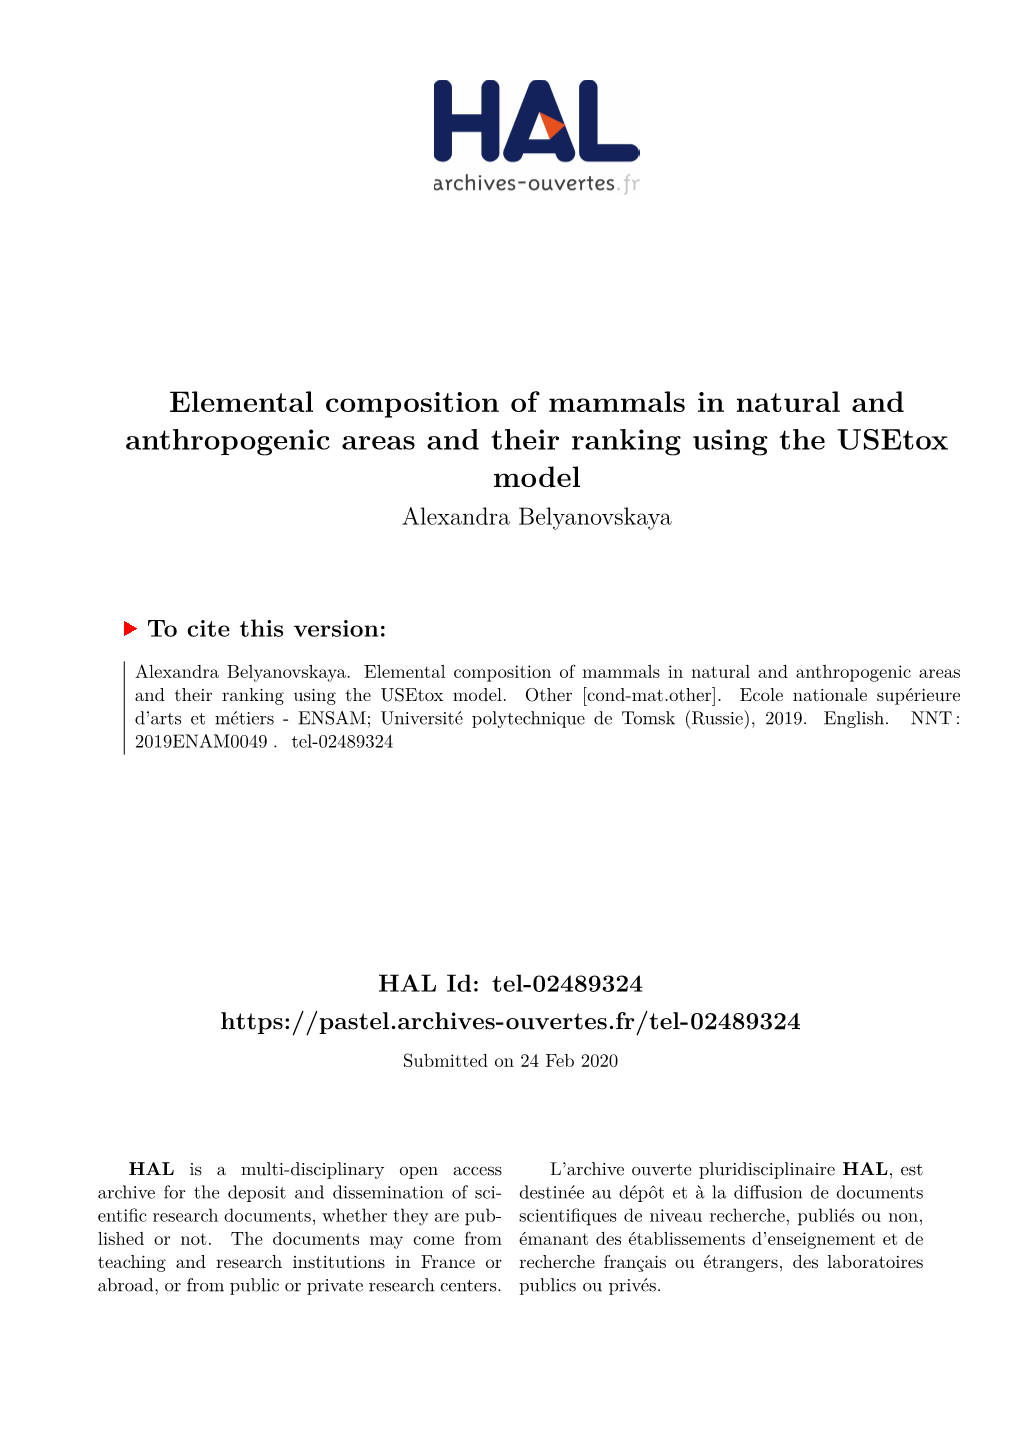 Elemental Composition of Mammals in Natural and Anthropogenic Areas and Their Ranking Using the Usetox Model Alexandra Belyanovskaya